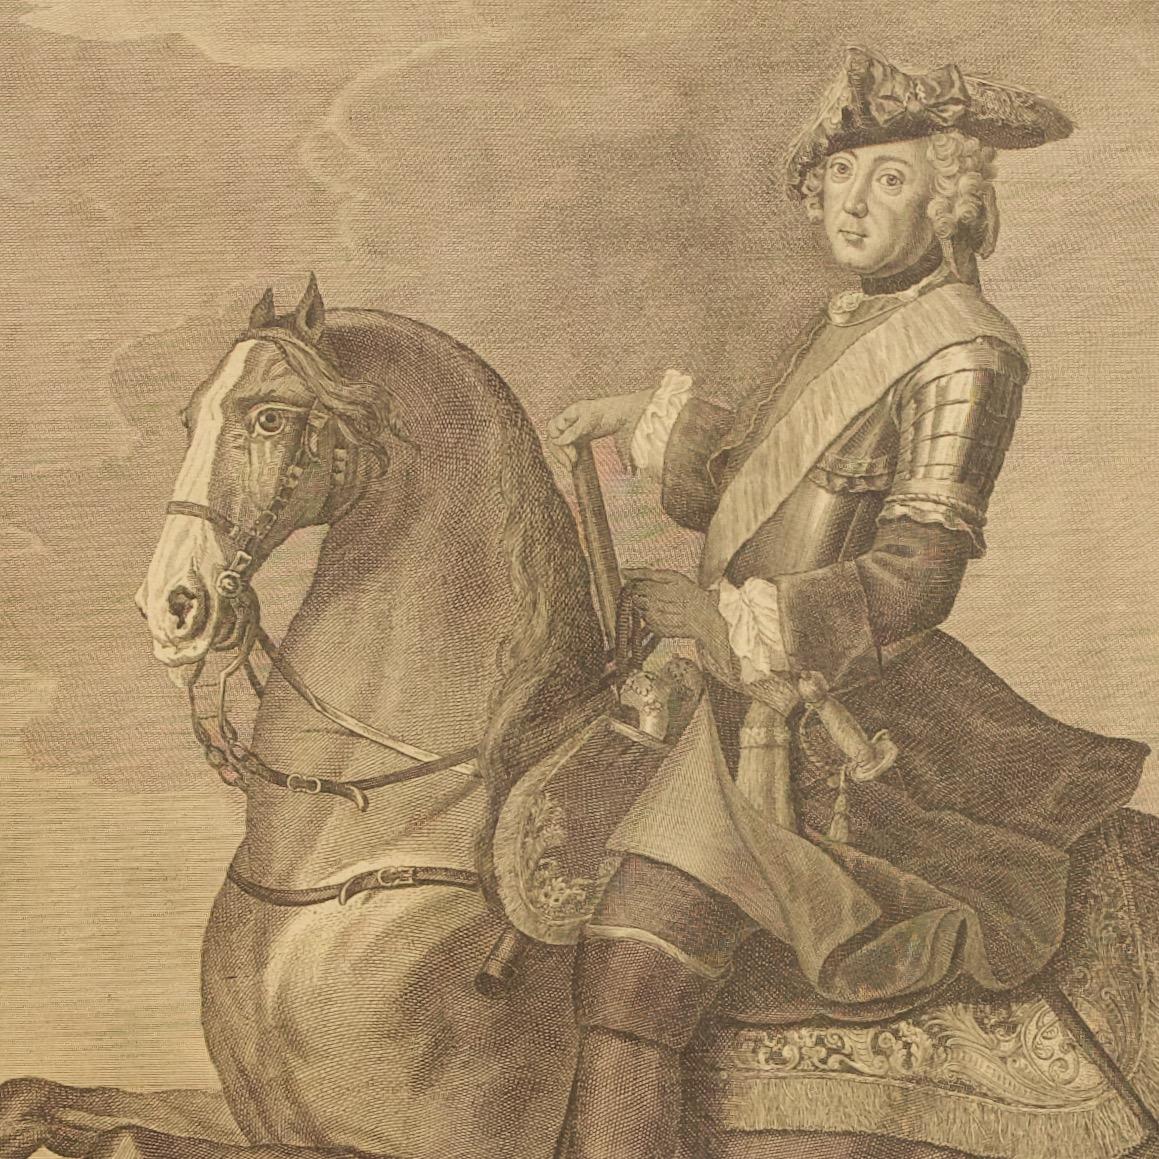 Engraved 18th Century Engraving Frederick II of Prussia, Joh. D. Schleuen (1711-1771)